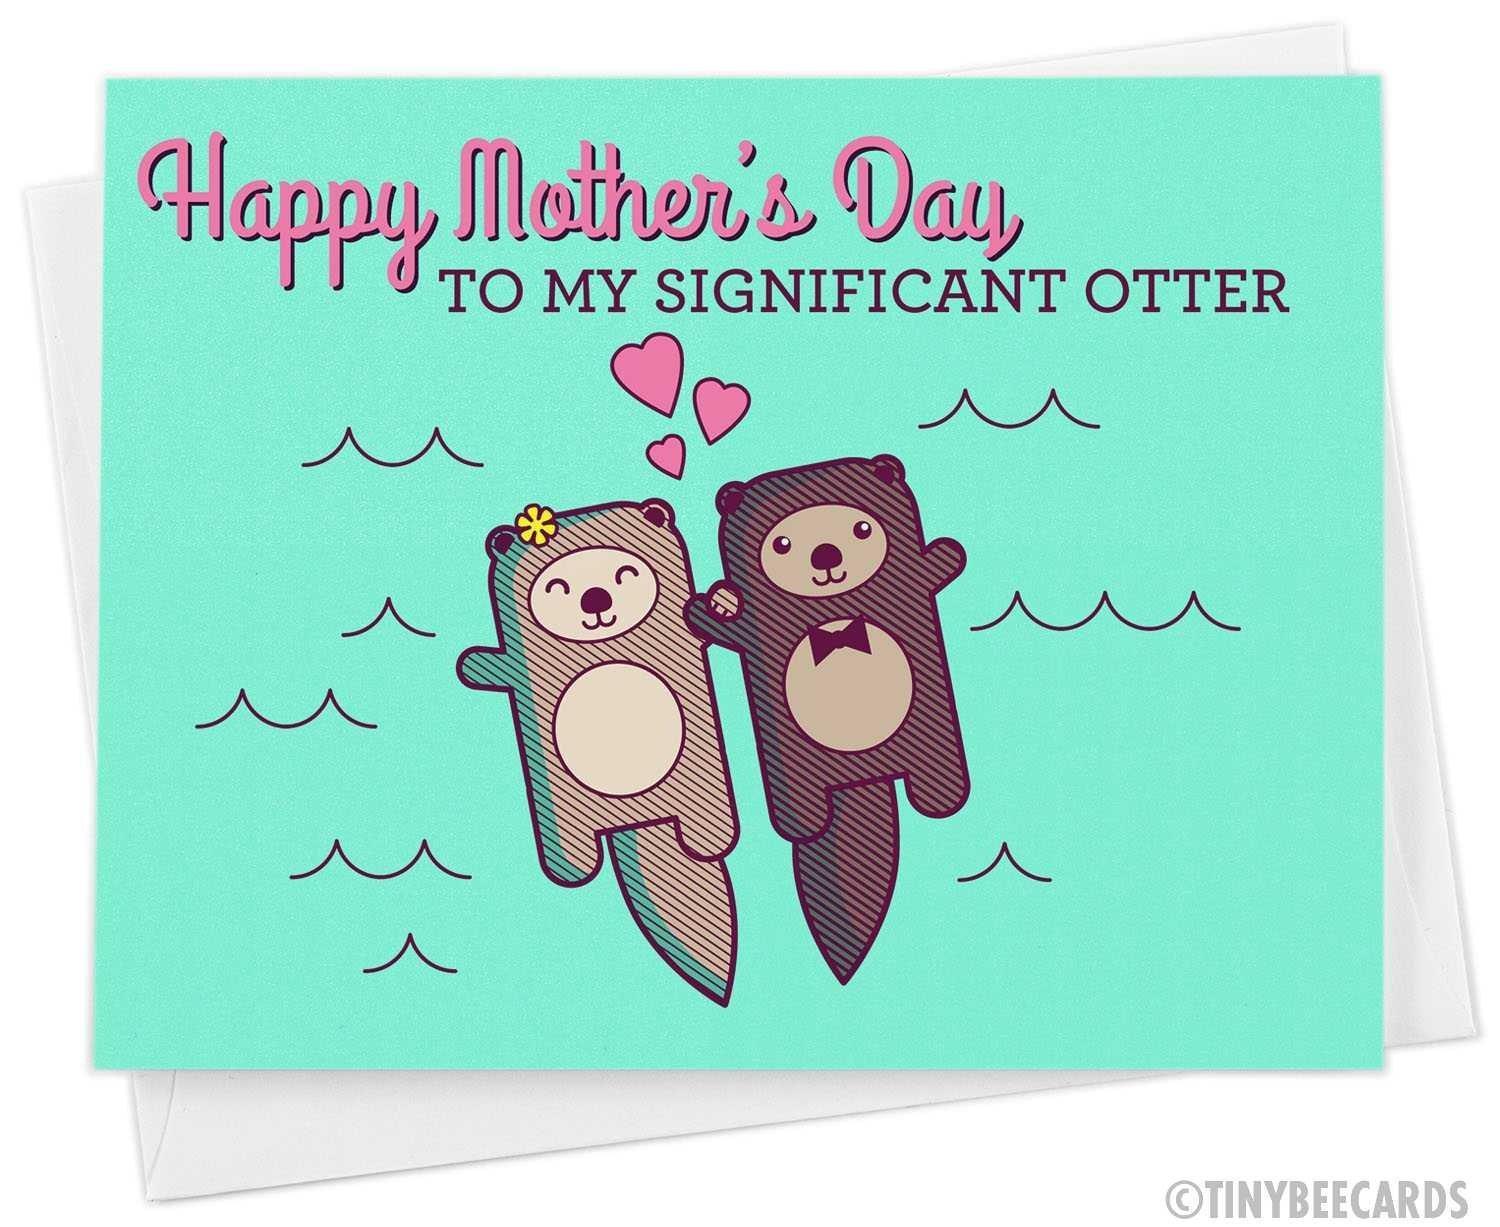 http://thesockmonster.com/cdn/shop/files/happy-mother-s-day-to-my-significant-otter-or-mother-s-day-card-for-wife-by-tiny-bee-cards-the-sock-monster.jpg?v=1703870220